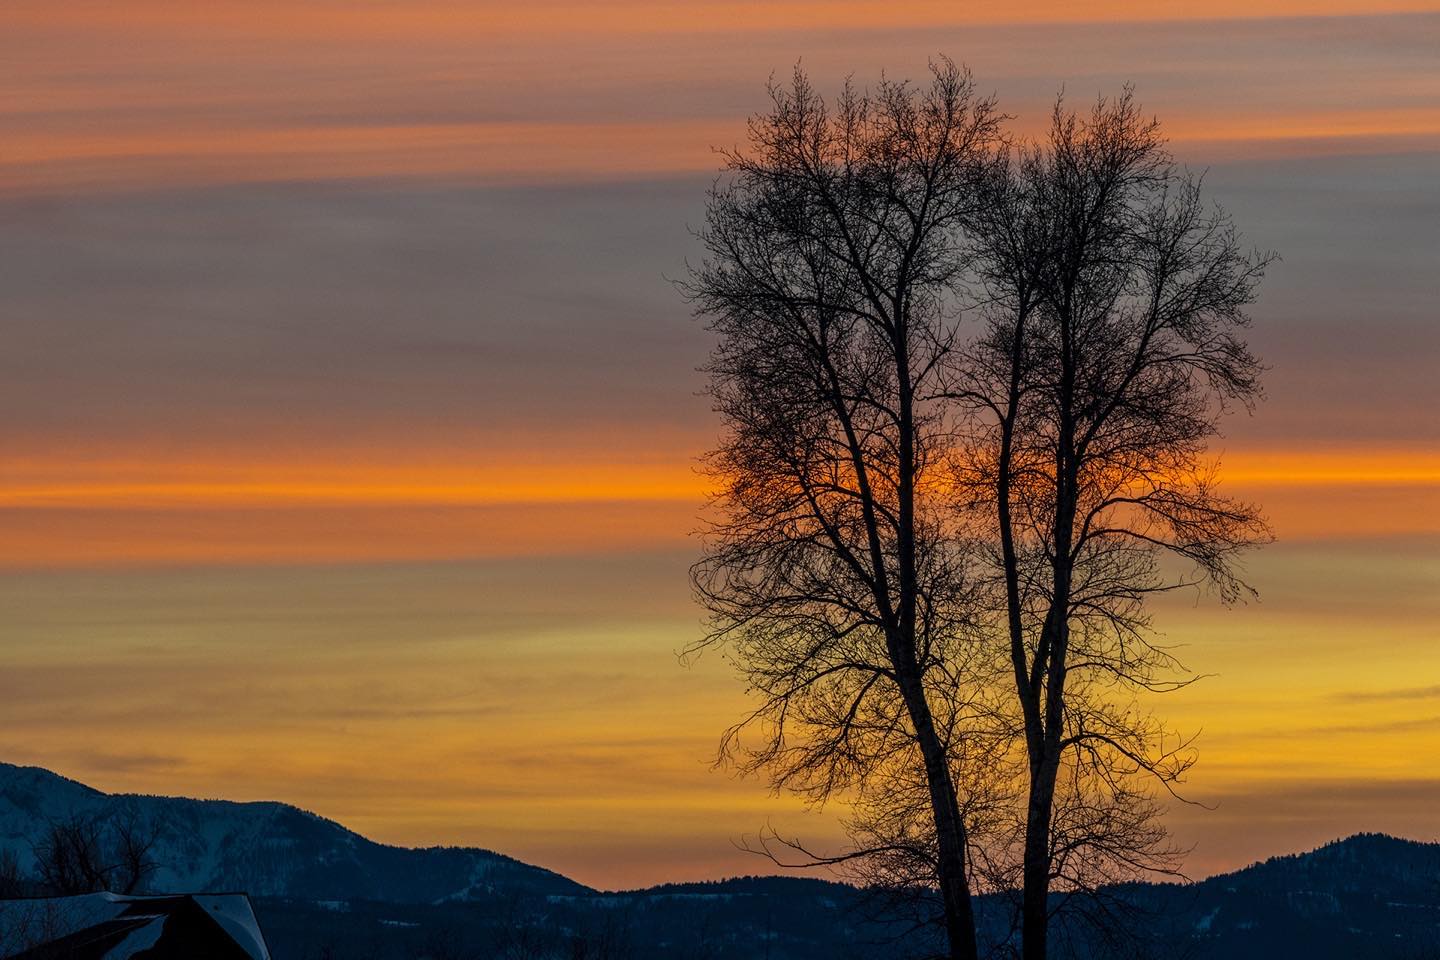 Sunsets in Teton Valley, Idaho are extraordinary! This one with bands of color was a great background for the silhouetted trees. #tetonvallyidaho #driggsidaho #bestofthegemstate #orcuttphotography #sunsettetonvalley